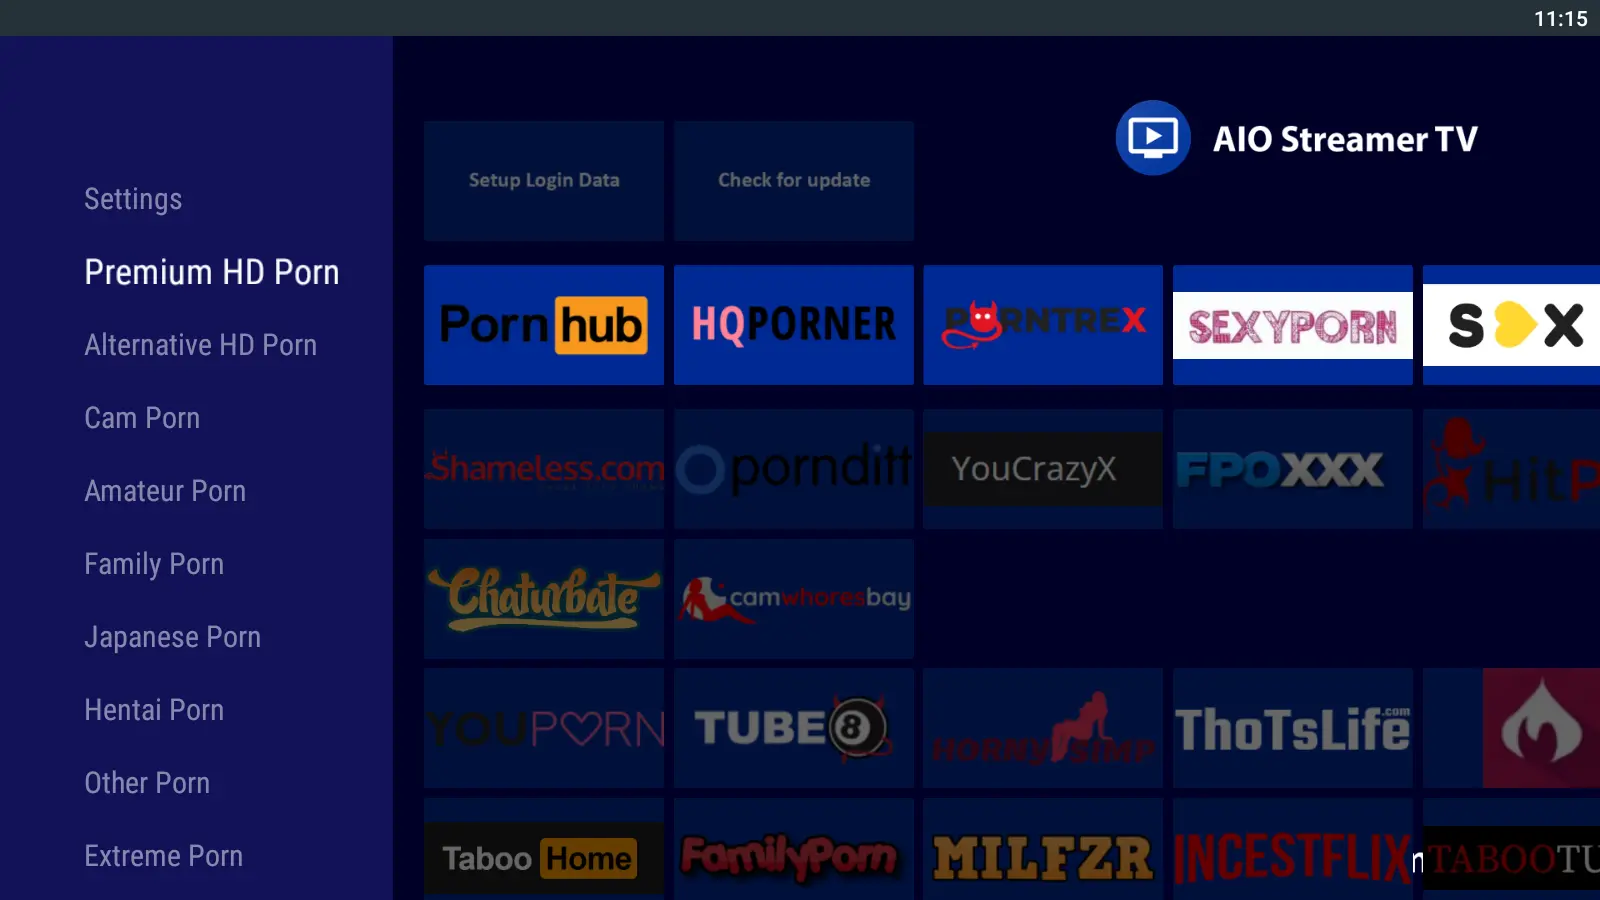 AIO Streamer Porn App that show videos and a Picture in Picture Player